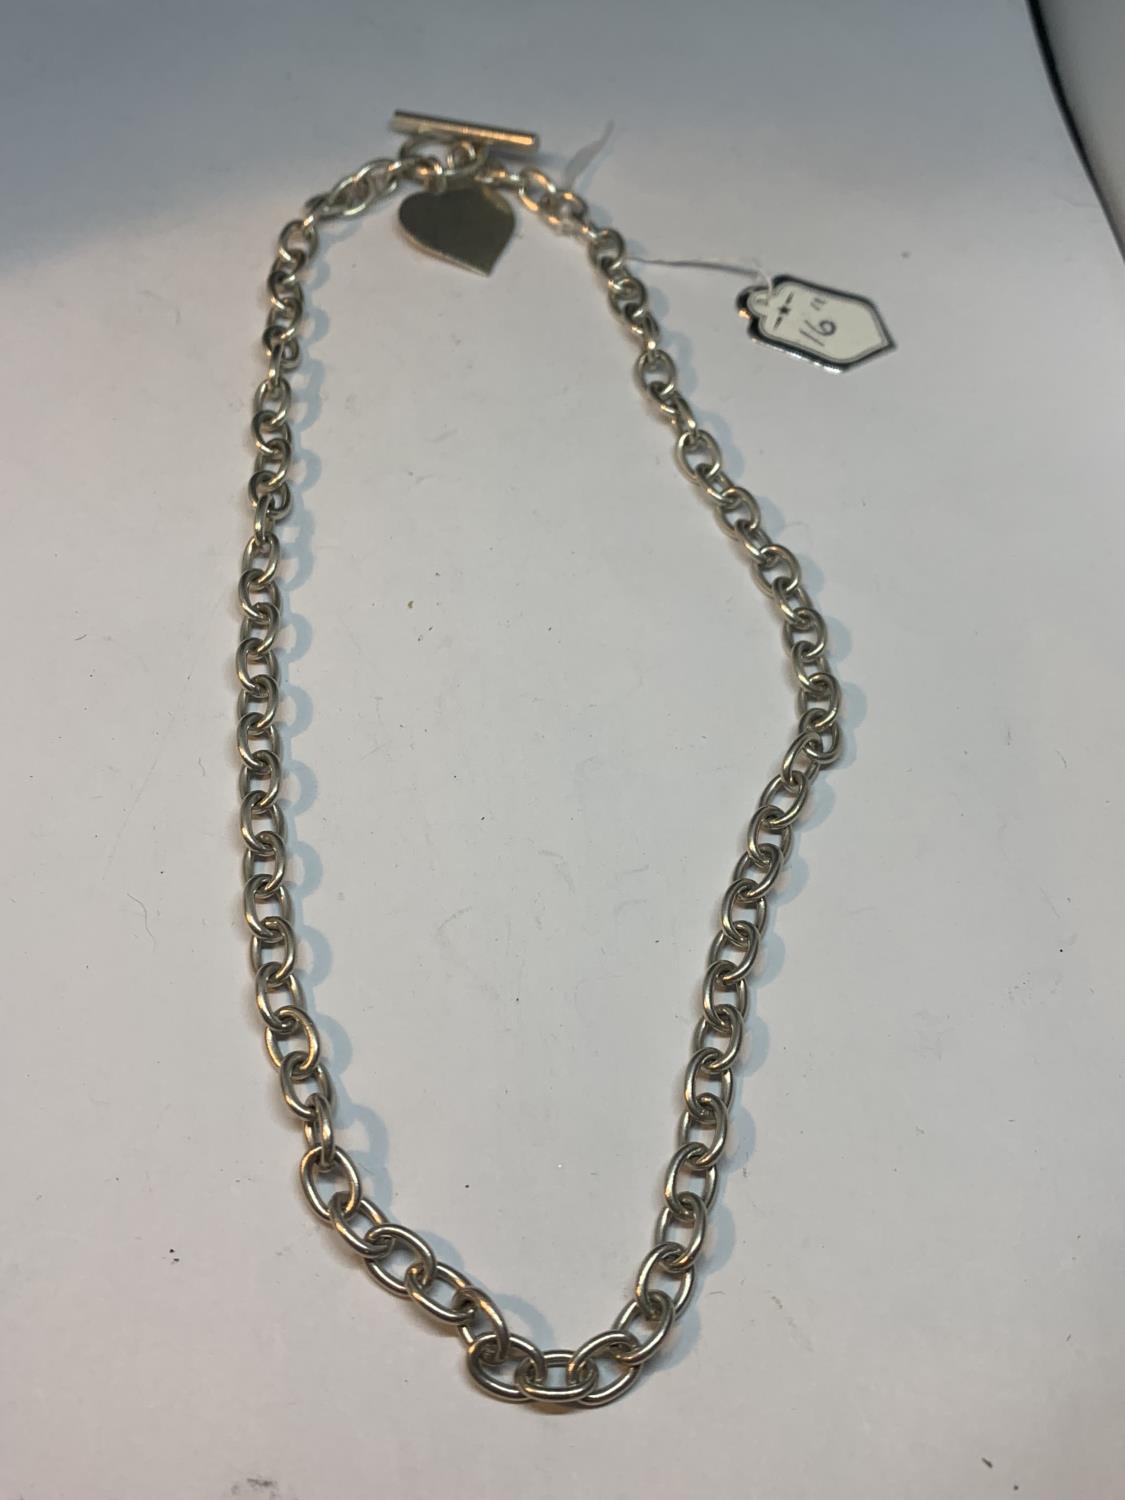 A SILVER NECKLACE WITH HEART PENDANT 16 INCHES LONG